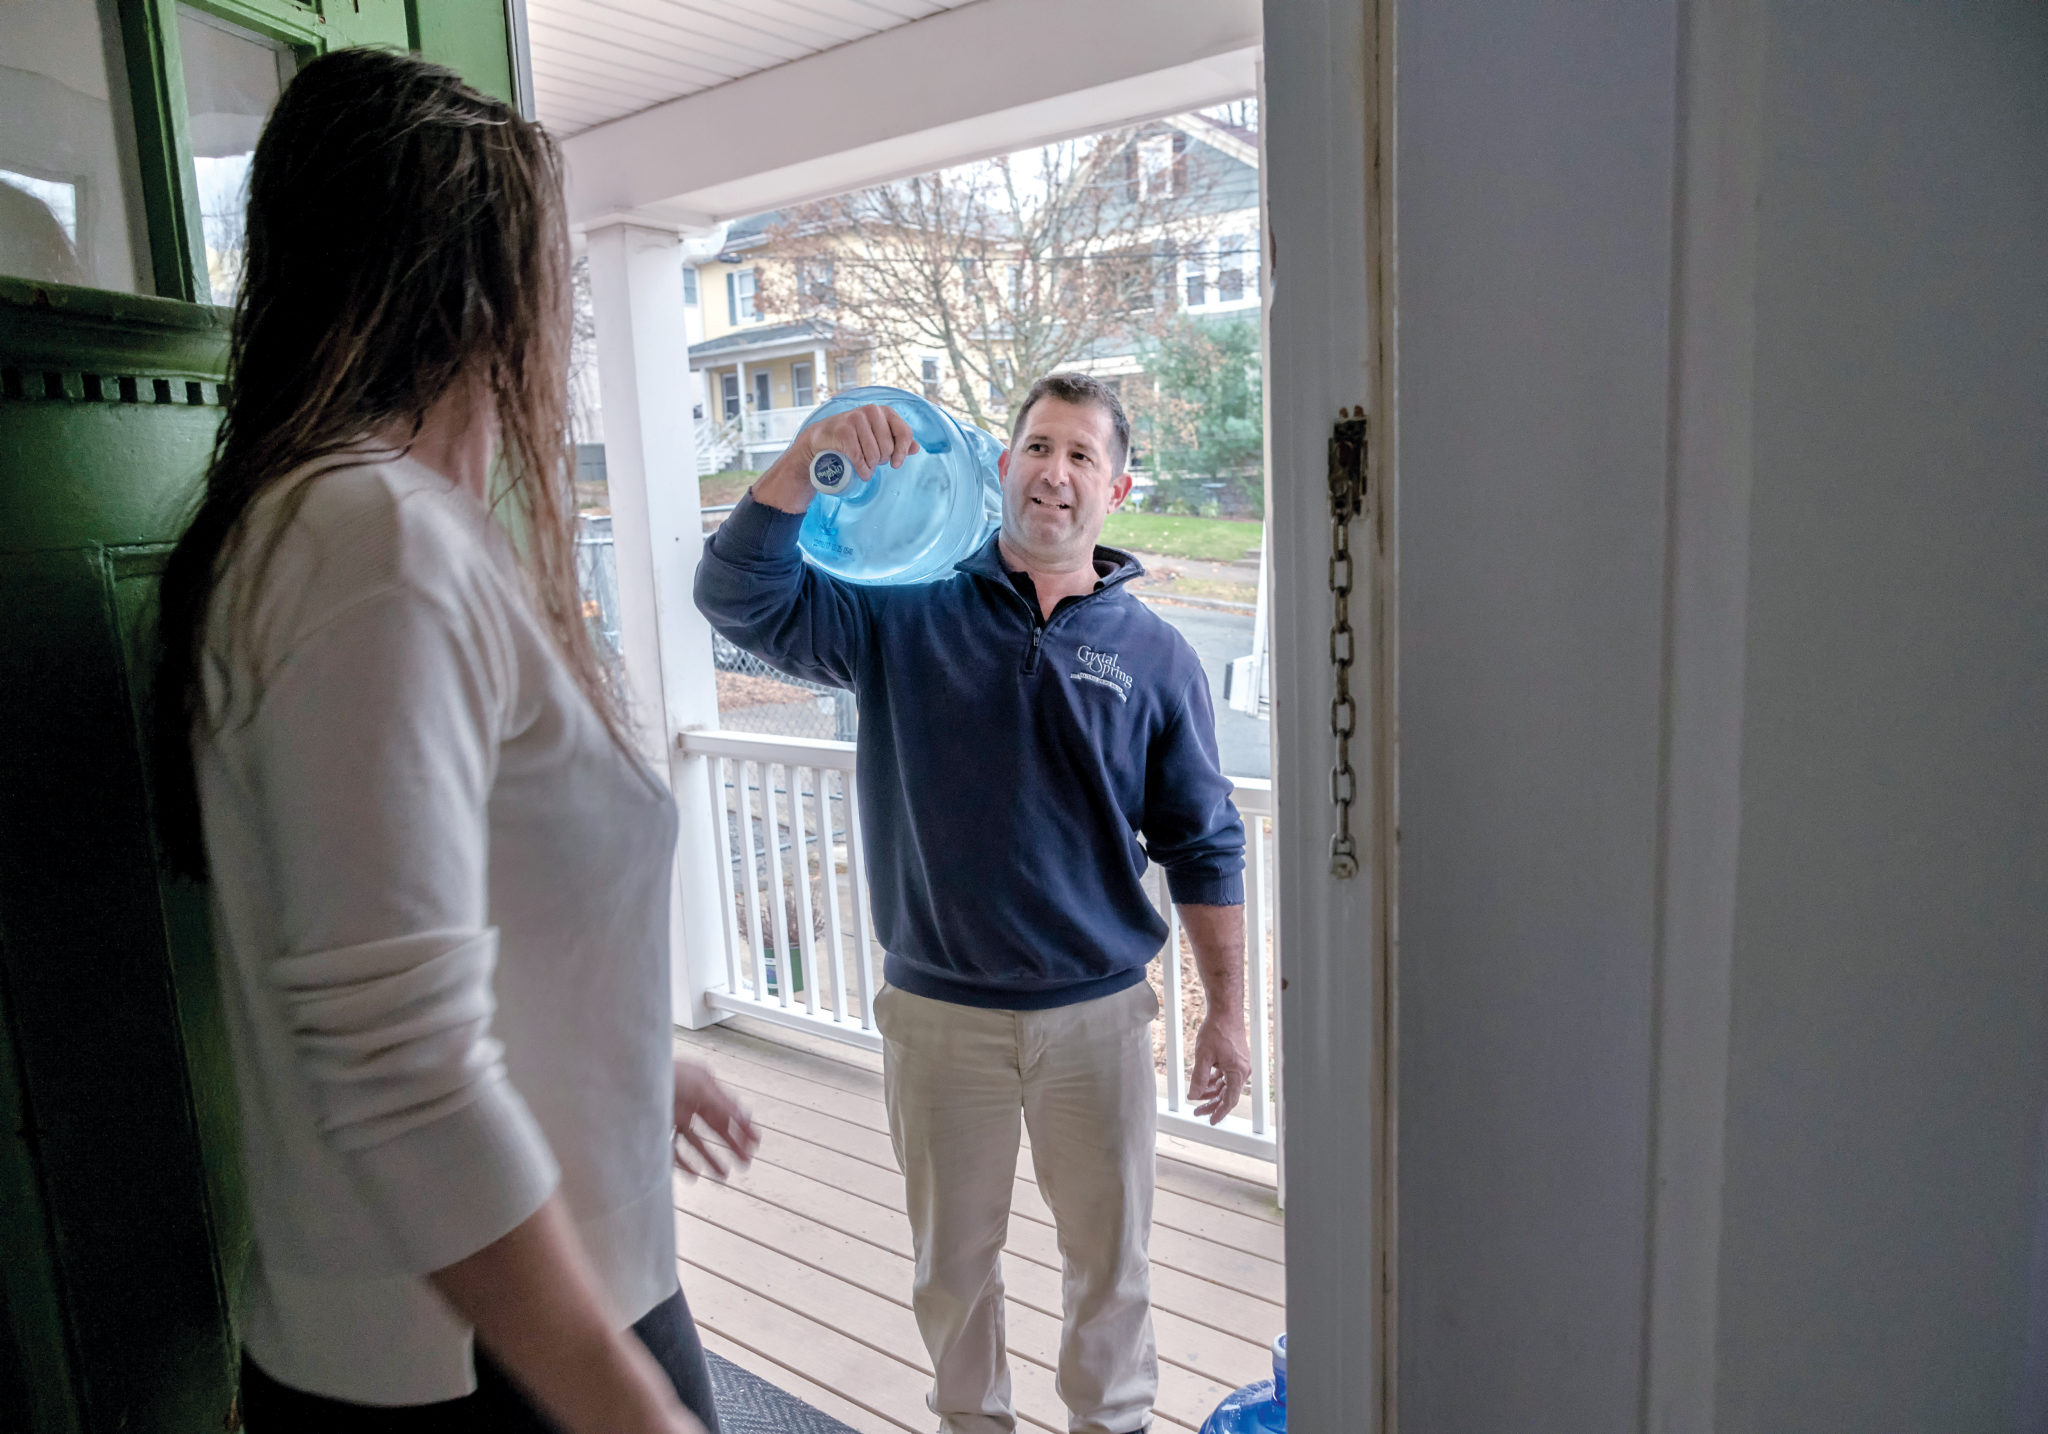 CONTAMINANT FREE: Paul Cicillini, carrier for Crystal Springs Water Co., delivers water to the apartment of Natalie Drozhzhin in Providence. Customers are willing to pay monthly for delivery of drinking water they know is free of contaminants. / PBN PHOTO/MICHAEL SALERNO